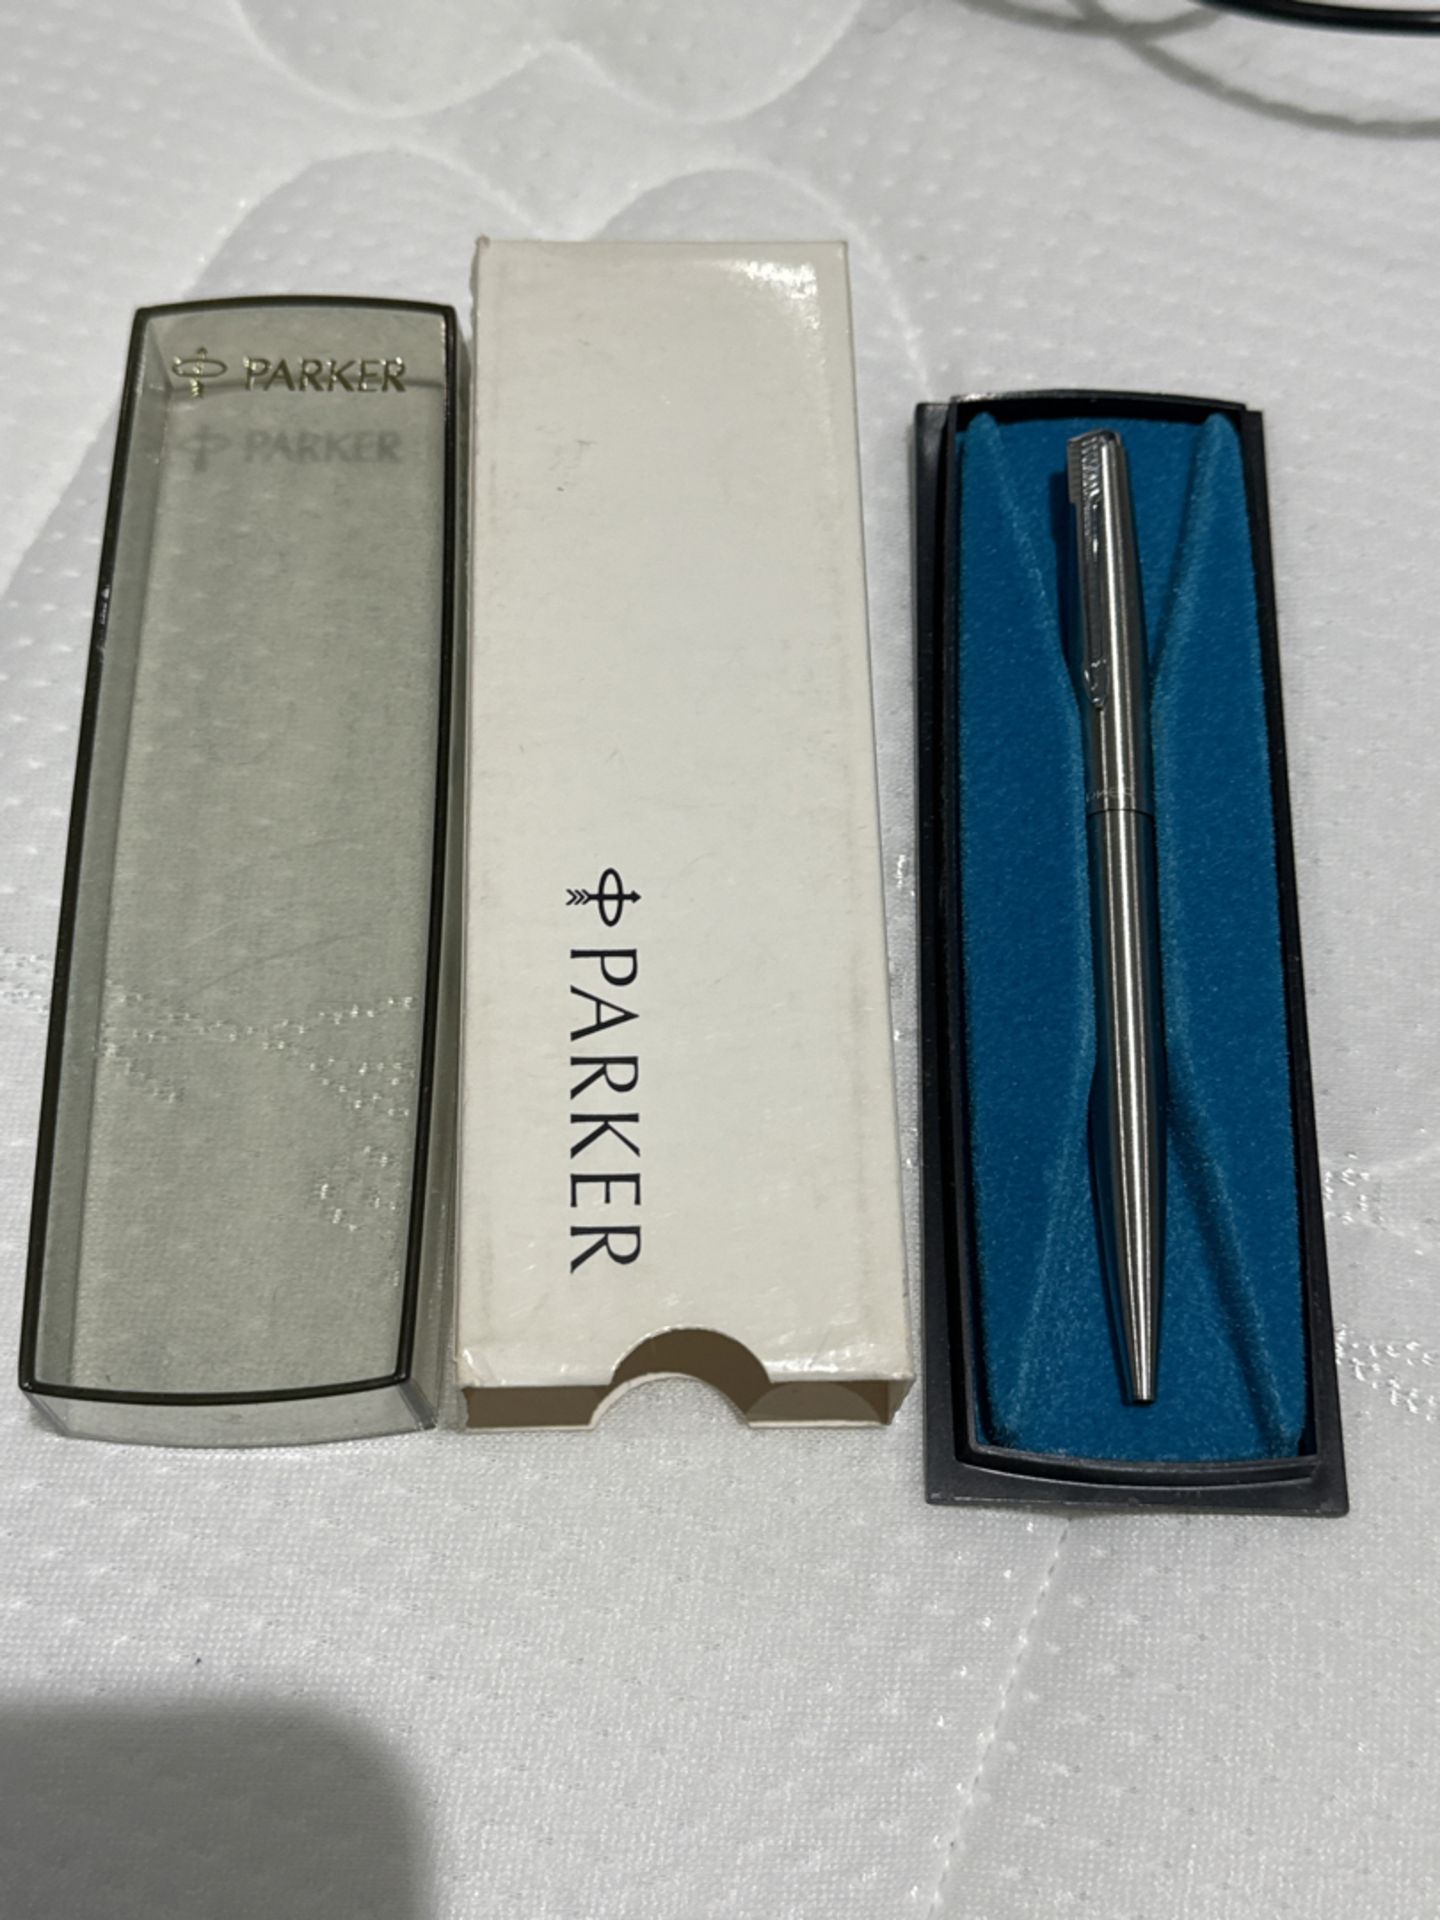 Vintage Parker Pen in Original Box - Looks new but some discolouration to packaging